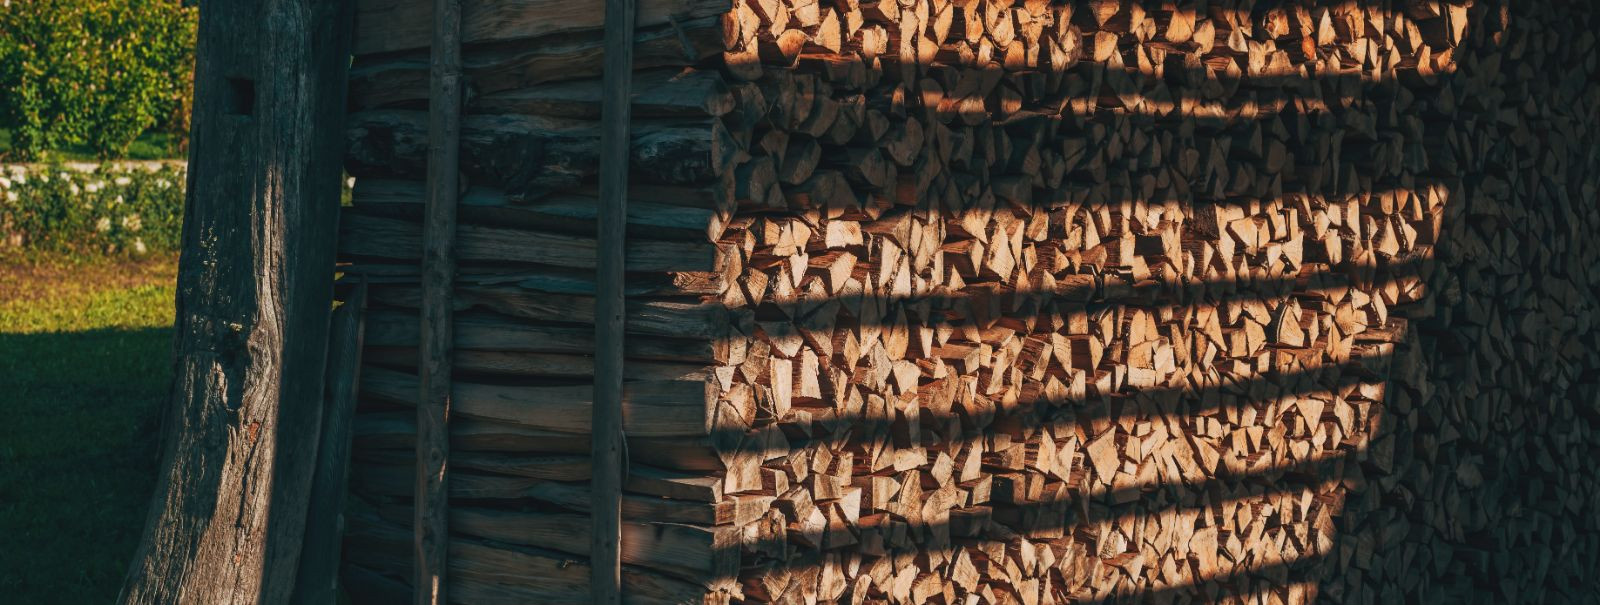 When it comes to heating your home, the type of firewood you use can make a significant difference. Seasoned firewood, which is wood that has been allowed to dr